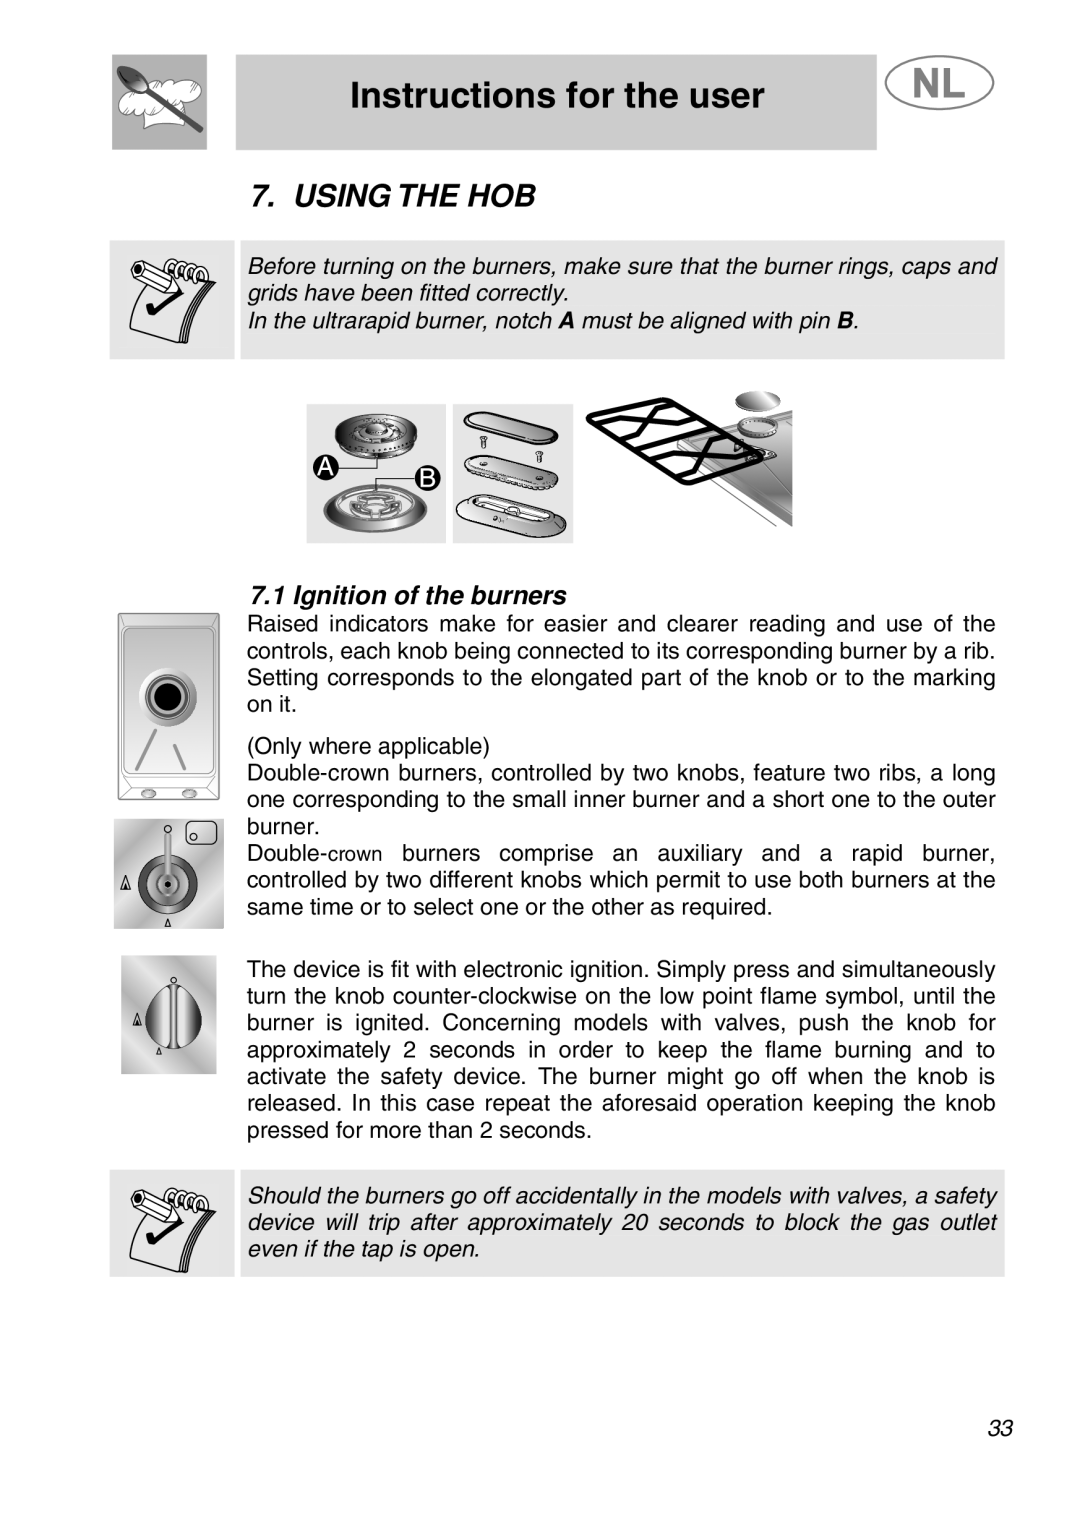 Smeg GKCO955, GKC955 manual Instructions for the user, Using The Hob, Ignition of the burners 